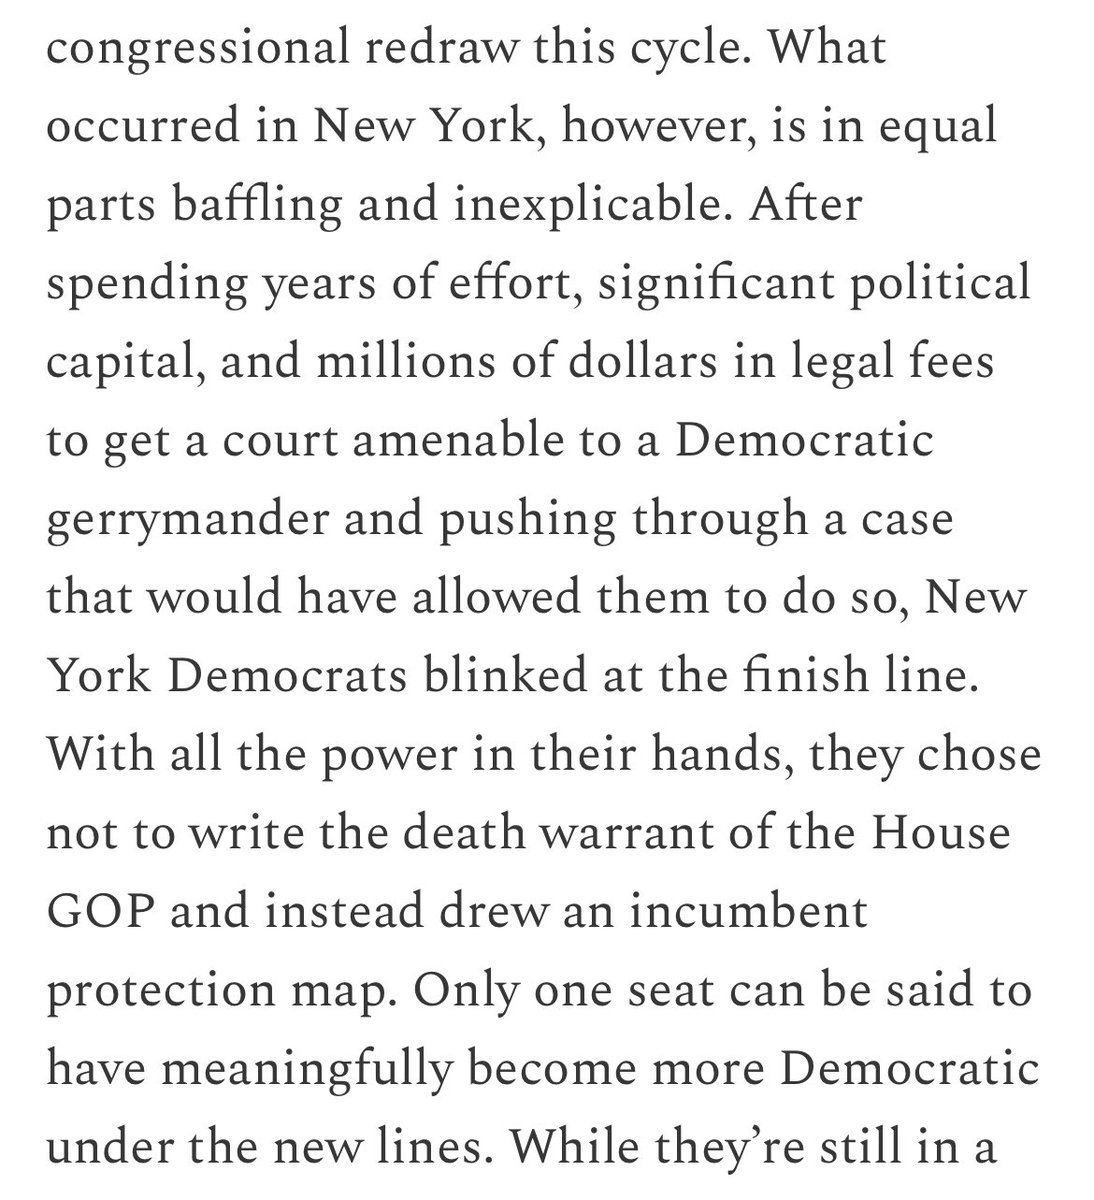 Most of this article is very bullish towards Dem chances but it’s also impossible to ignore this. You cannot overstate just how ass NY Dems are.